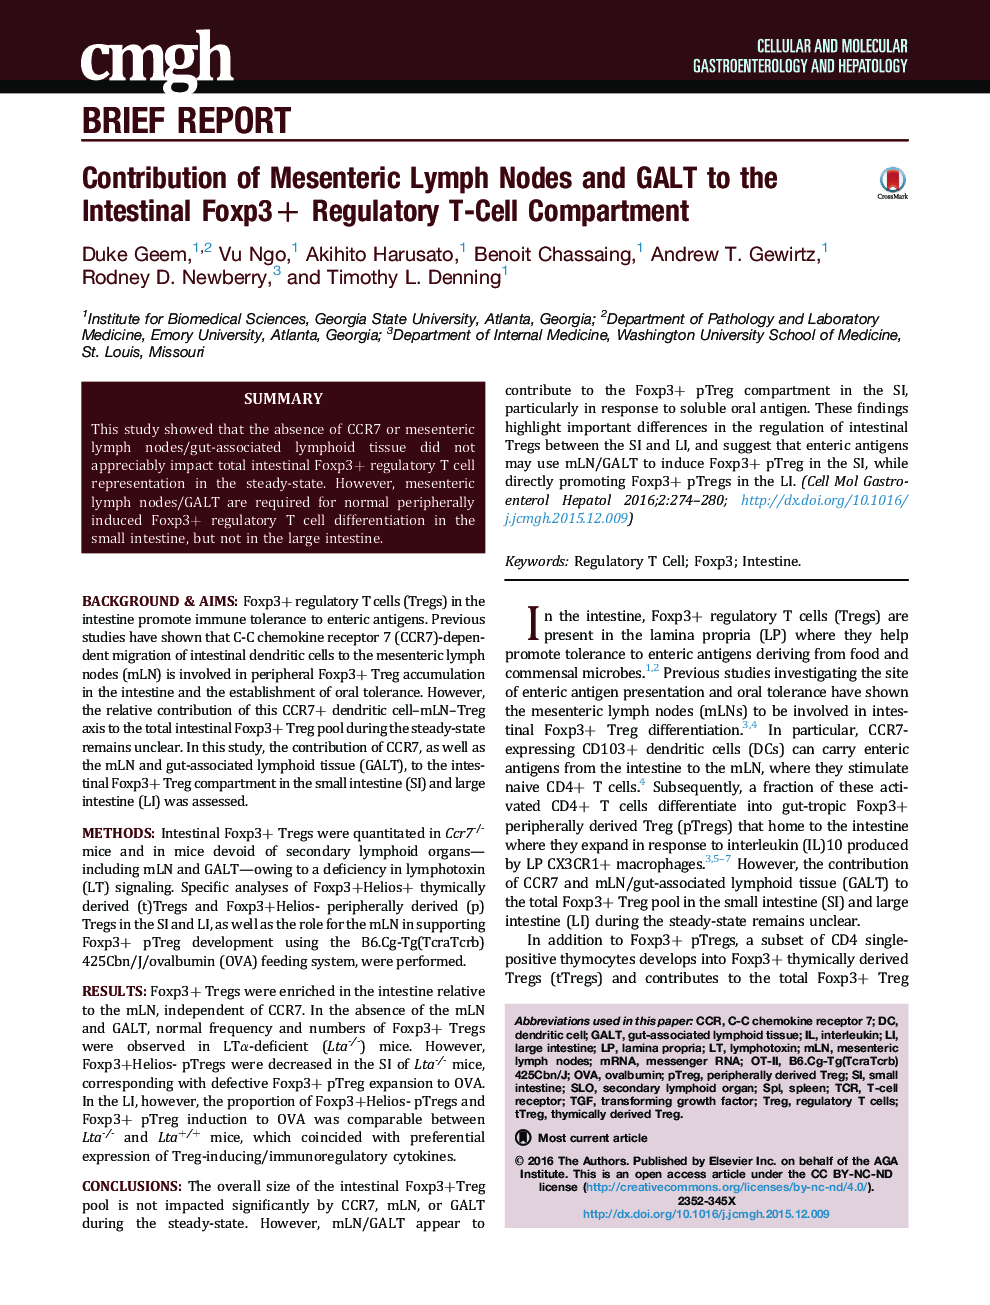 Contribution of Mesenteric Lymph Nodes and GALT to the Intestinal Foxp3+ Regulatory T-Cell Compartment